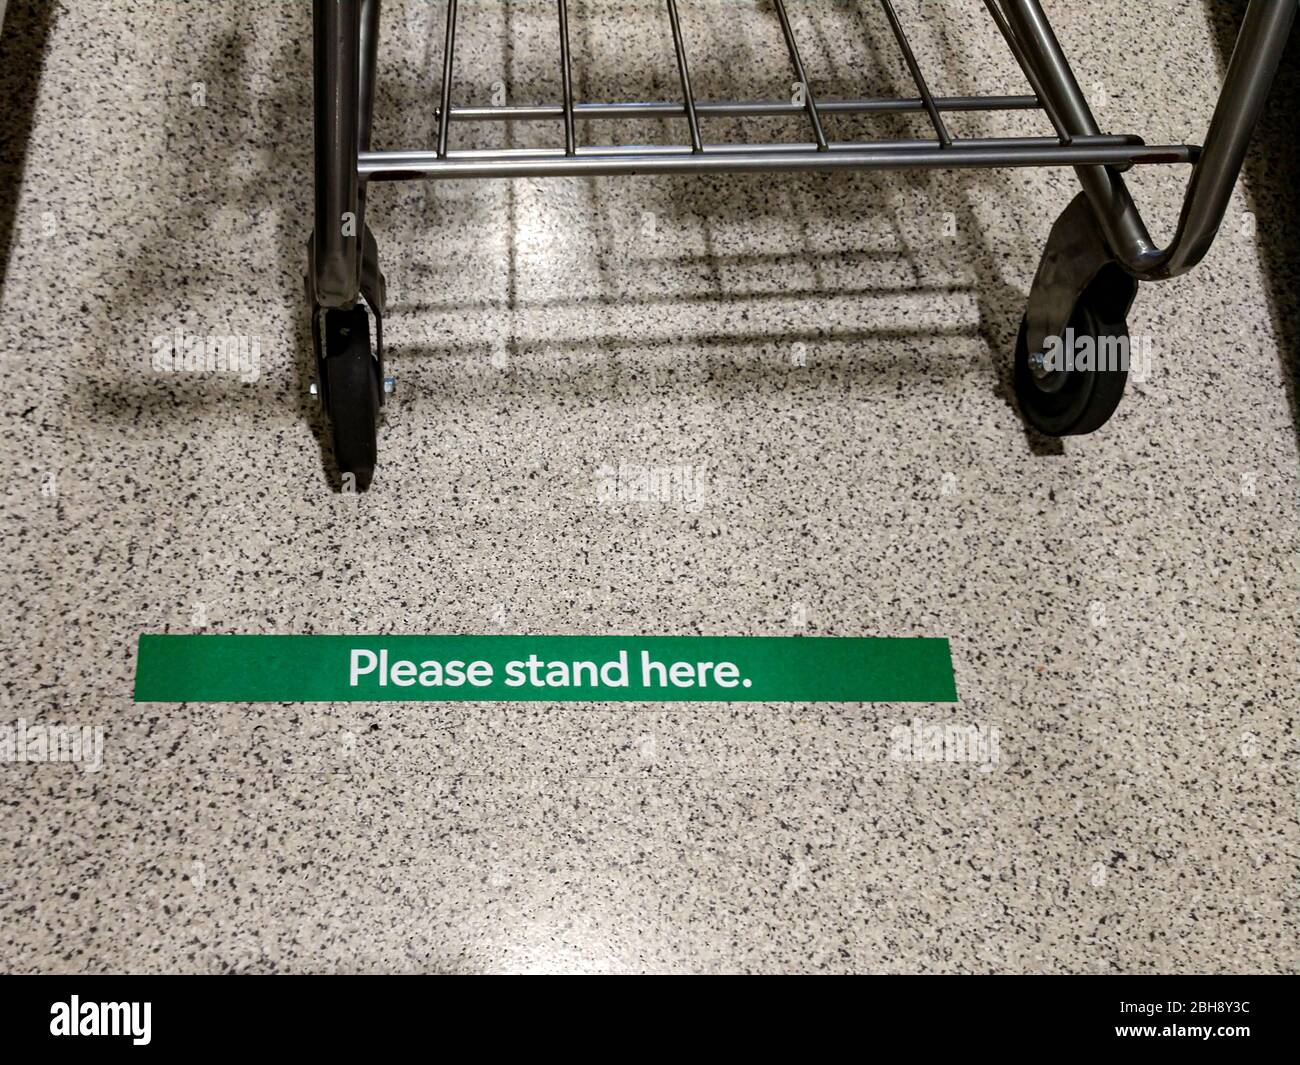 Social distancing signs in the grocery store Stock Photo